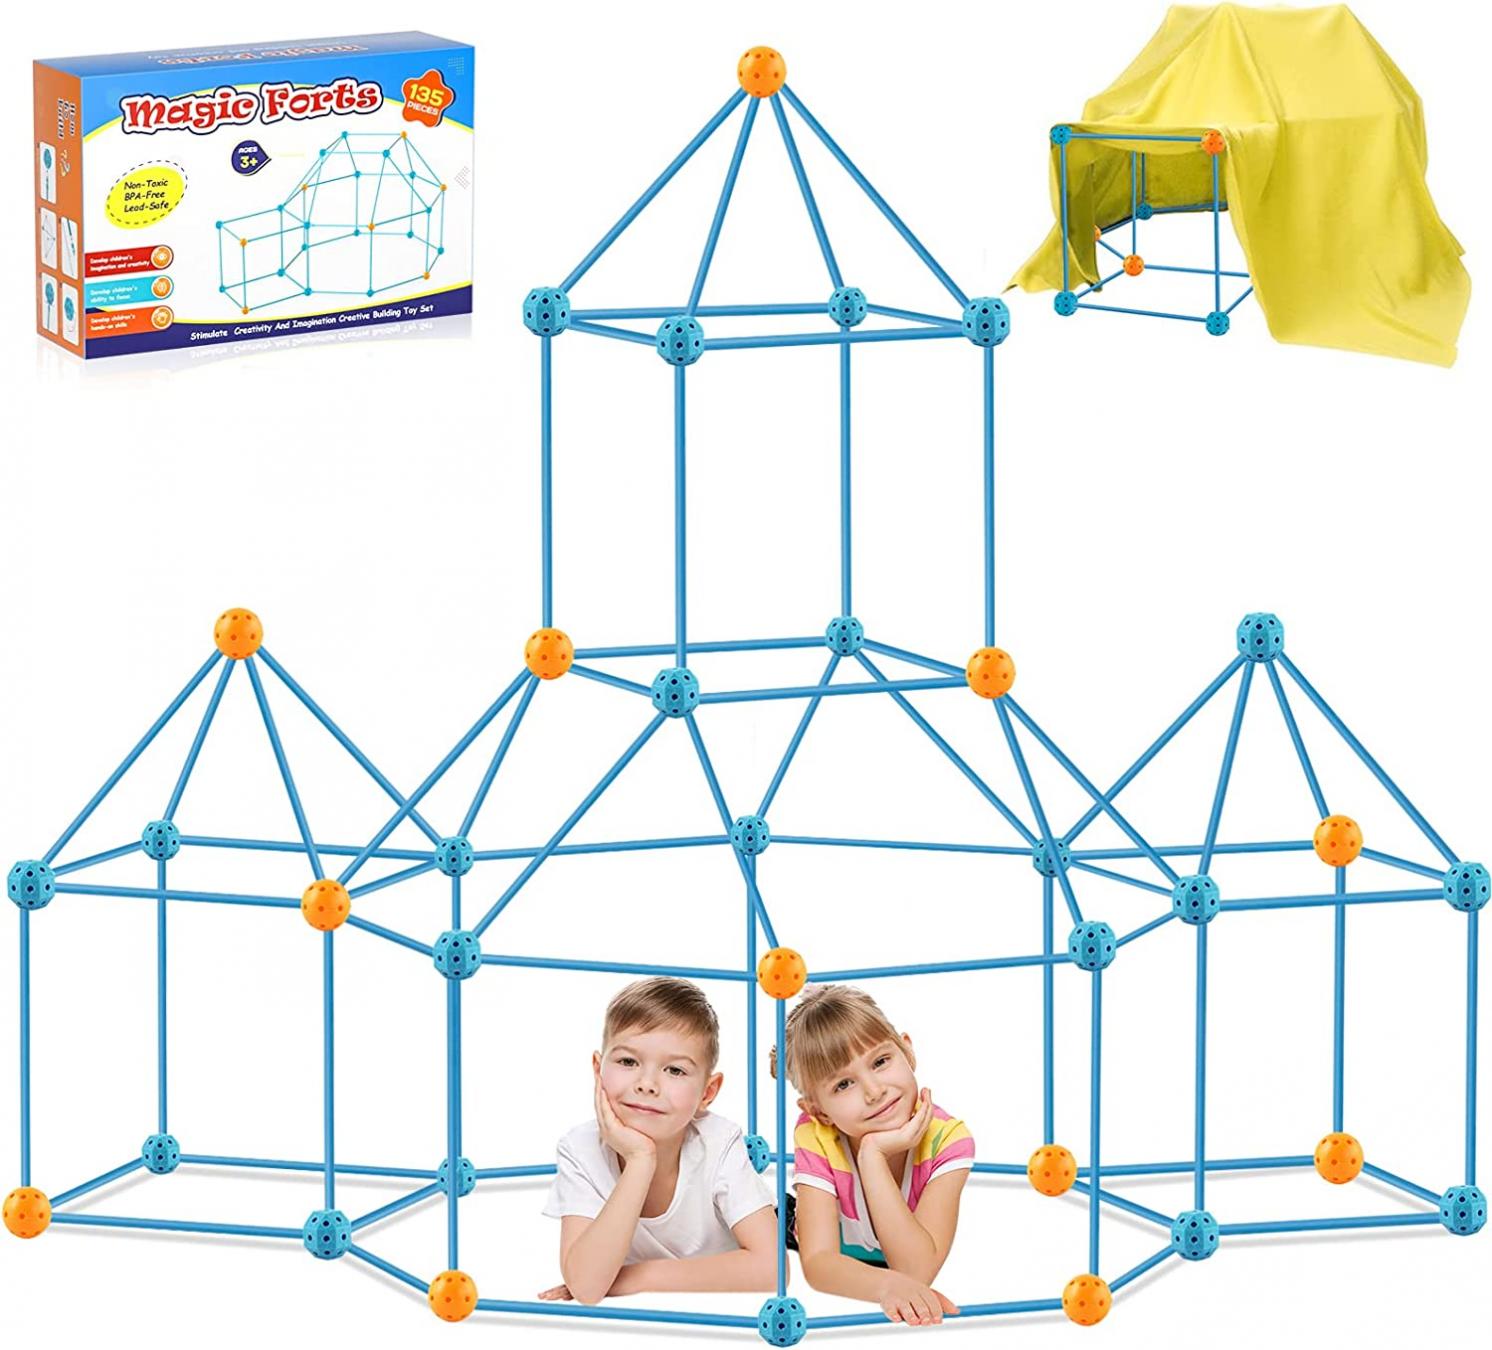 Kids Fort Building Kit, 135 PCS Indoor/Outdoor Play Fort Toys for Age 5,6,7,8,9,10,11,12 Years Old Boys & Girls, STEM Toys & Gifts Construction Fort DIY Castles Tunnels Play Tent Rocket Tower